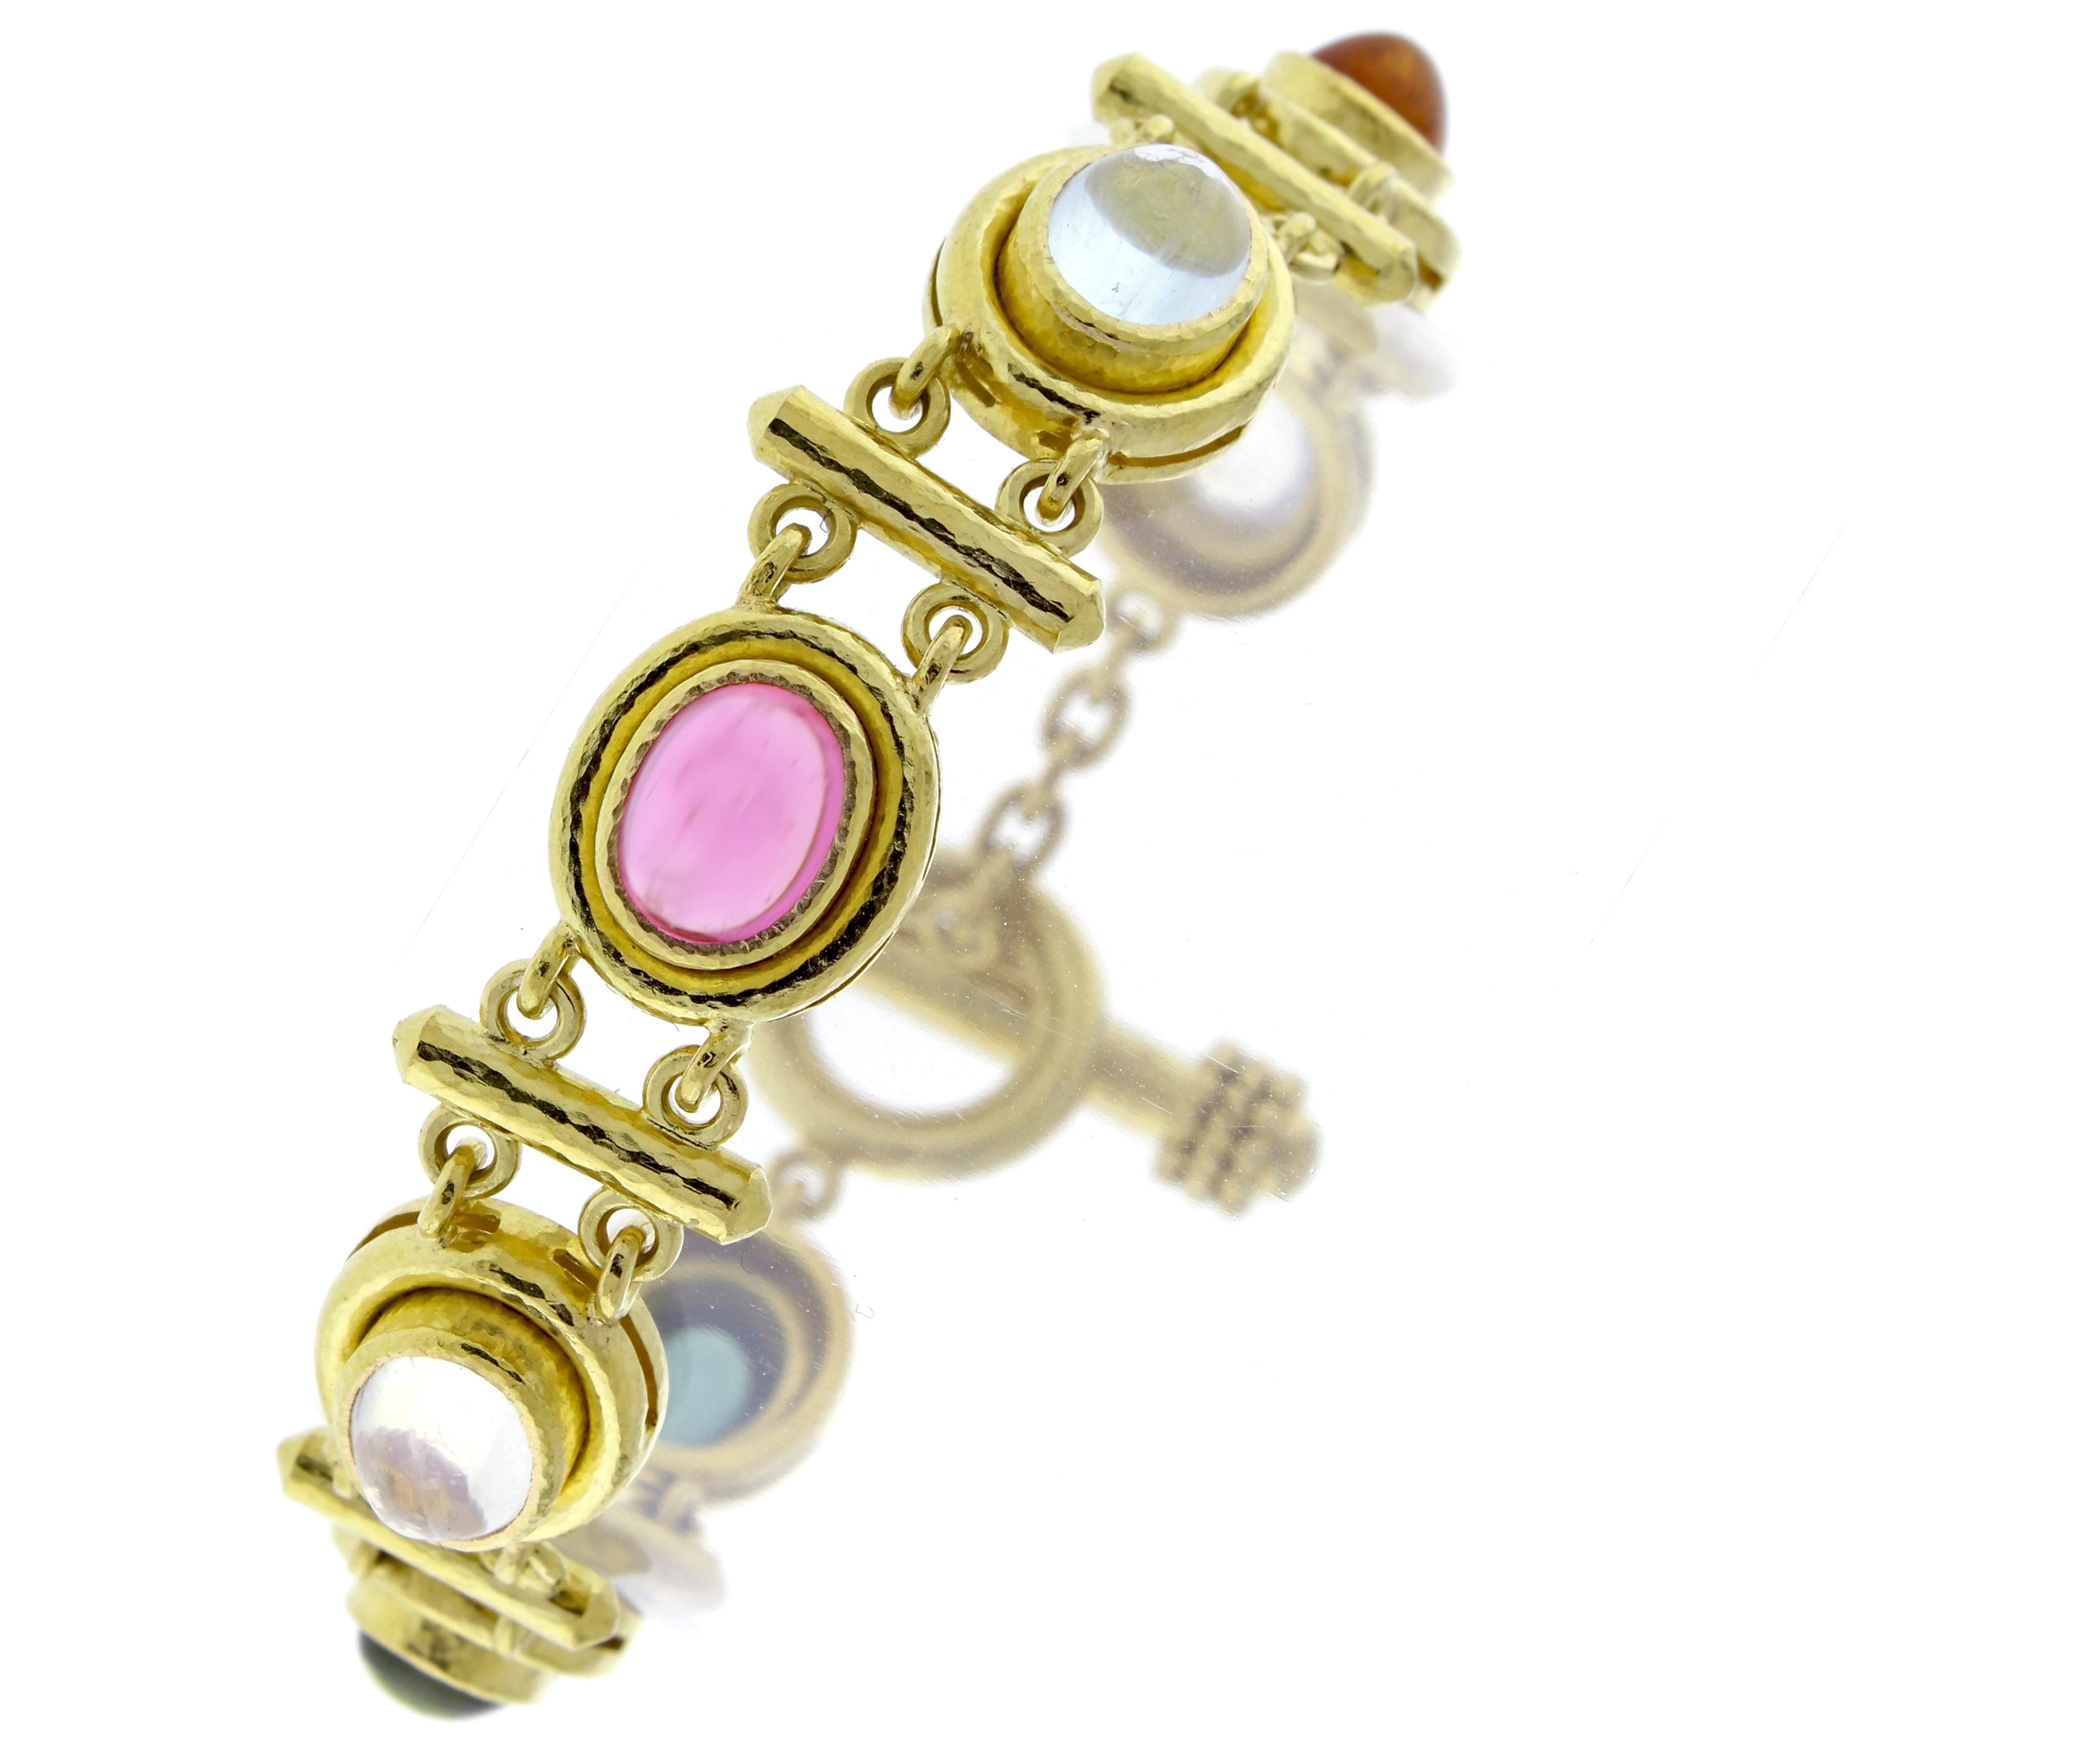 From Elizabeth Locke, a toggle bracelet featuring oval cabochon moonstones, citrine and tourmaline.  The cabochon gemstone links measure 12.4*14mm, 7 ¼ inches total length